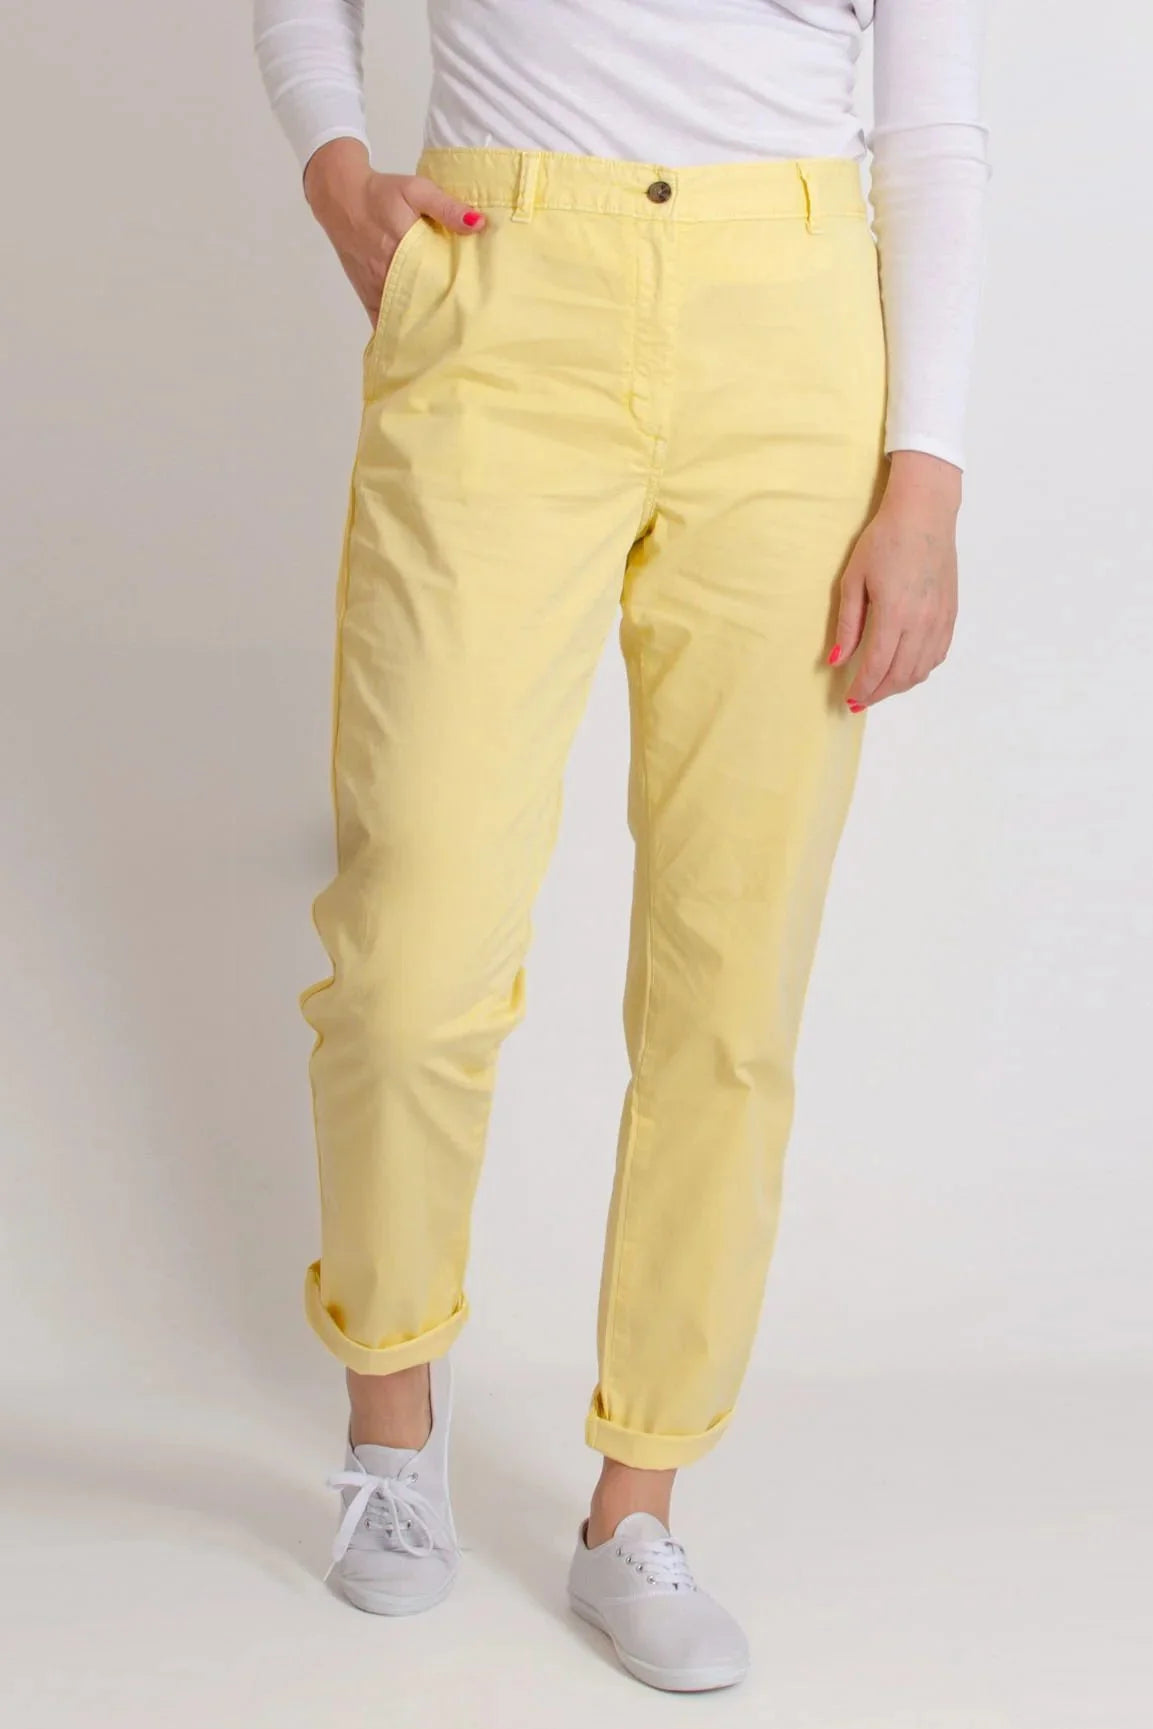 M&S Ankle Grazer Chino Trousers